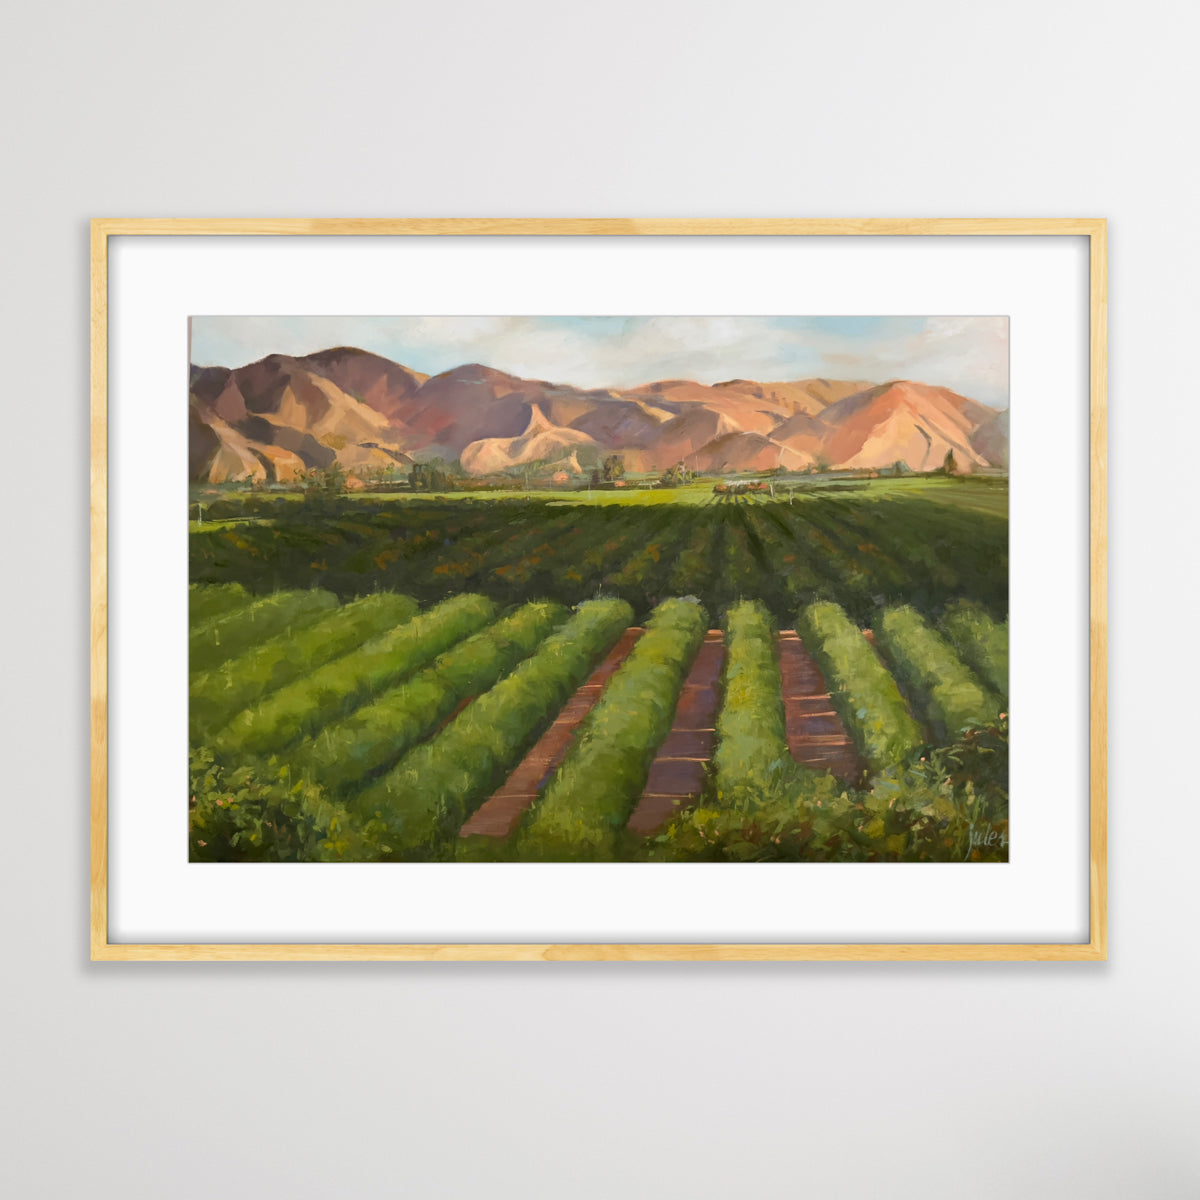 SOUTH MOUNTAIN WEST - Giclee Reproduction Print of Original Oil Painting